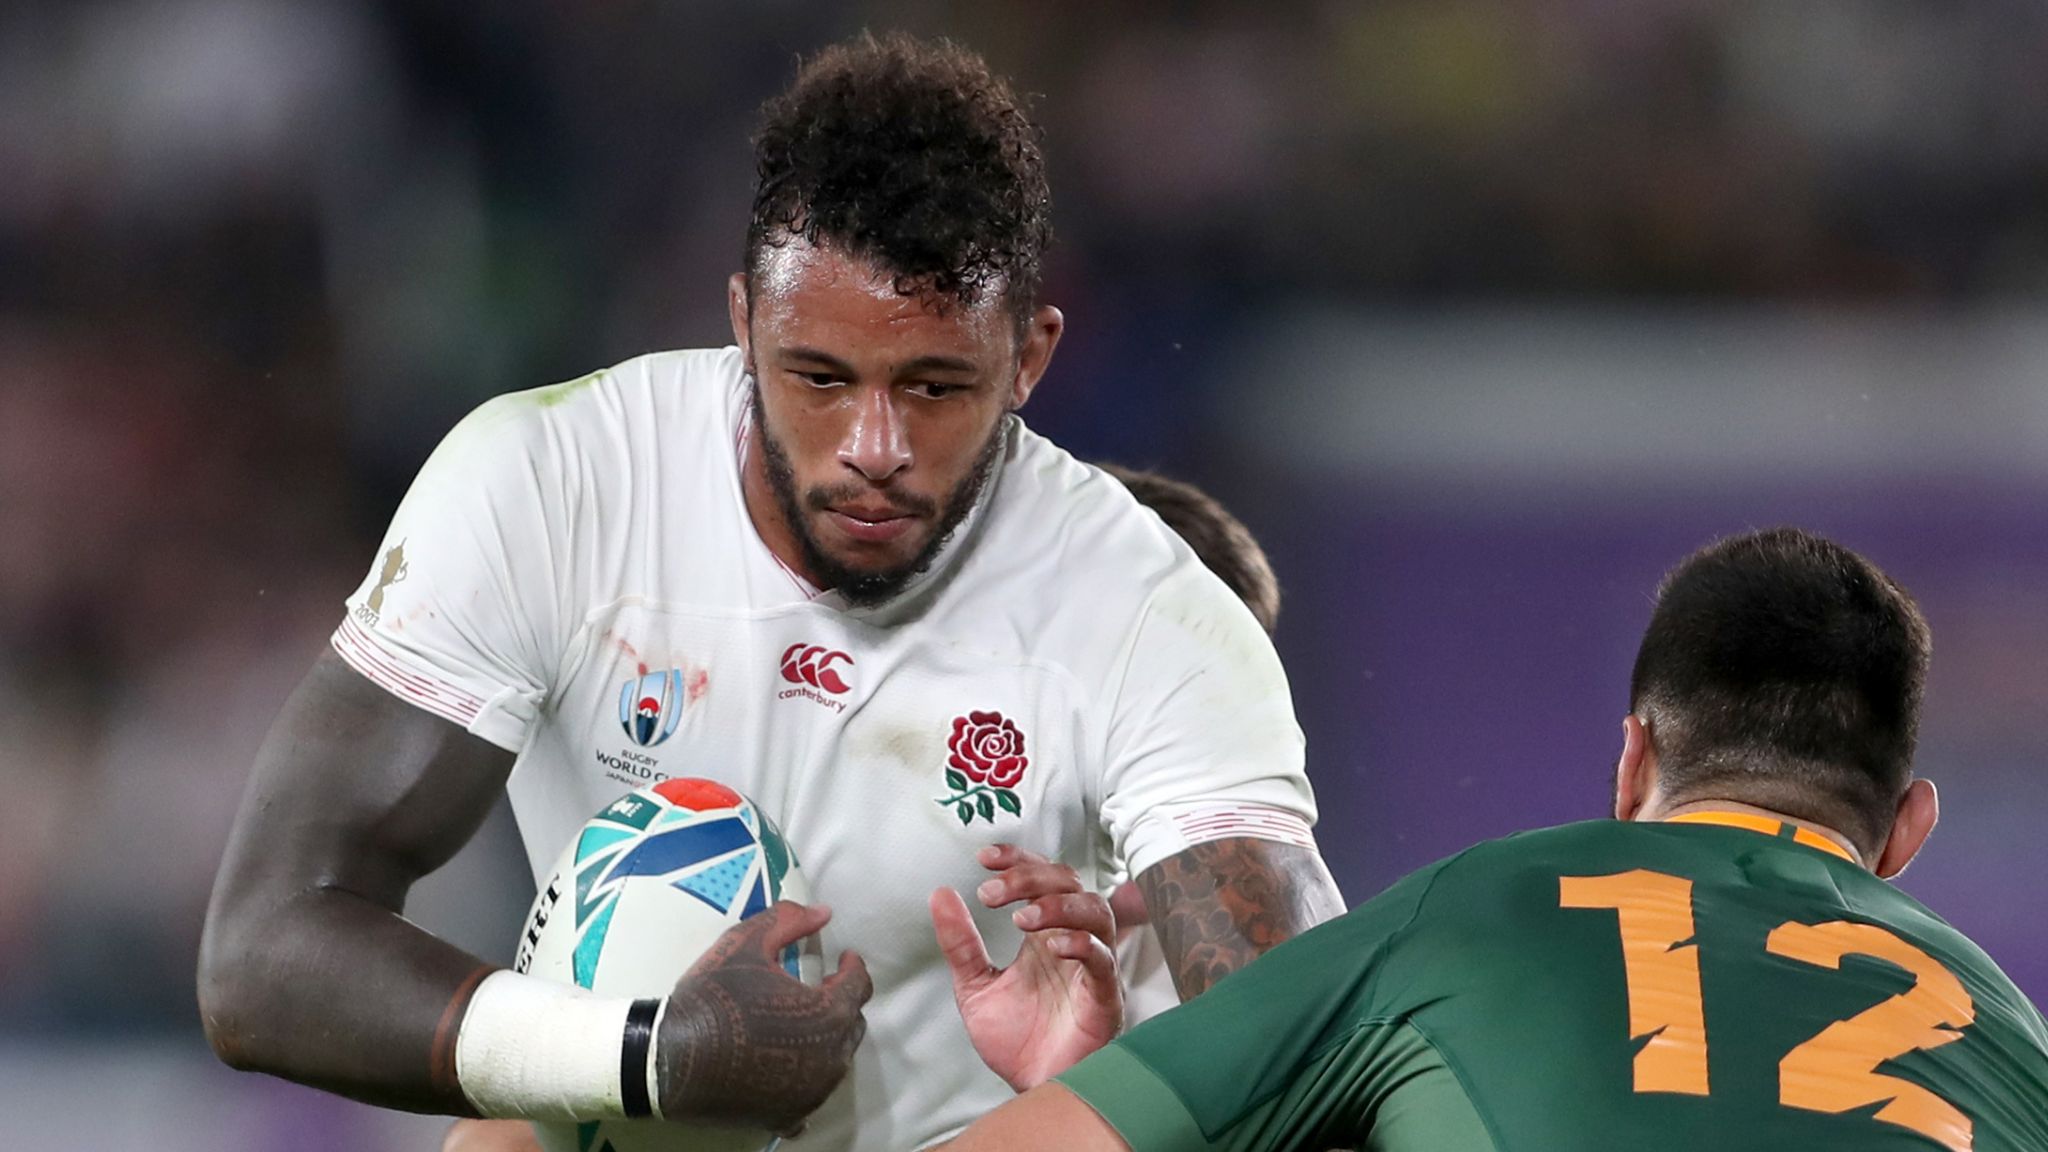 Courtney Lawes, Tom Curry and George Ford return to England Six Nations squad for Wales fixture Rugby Union News Sky Sports